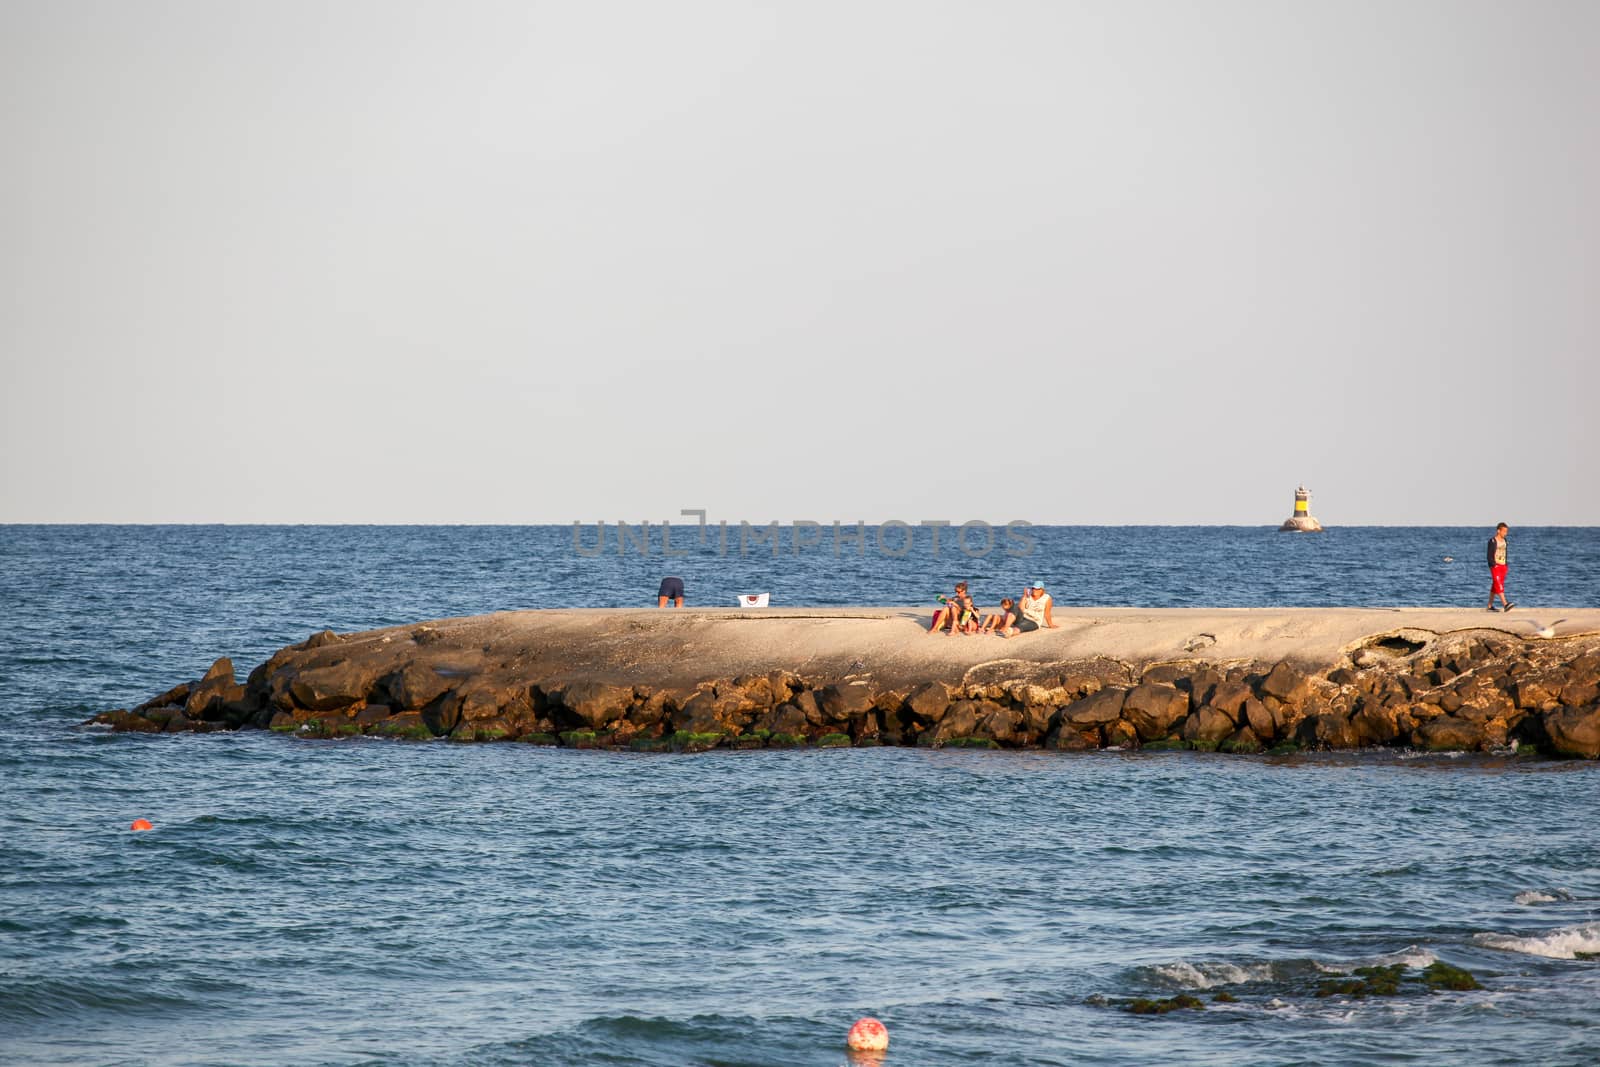 Pomorie, Bulgaria - July 12, 2019: People Relaxing On The Beach.